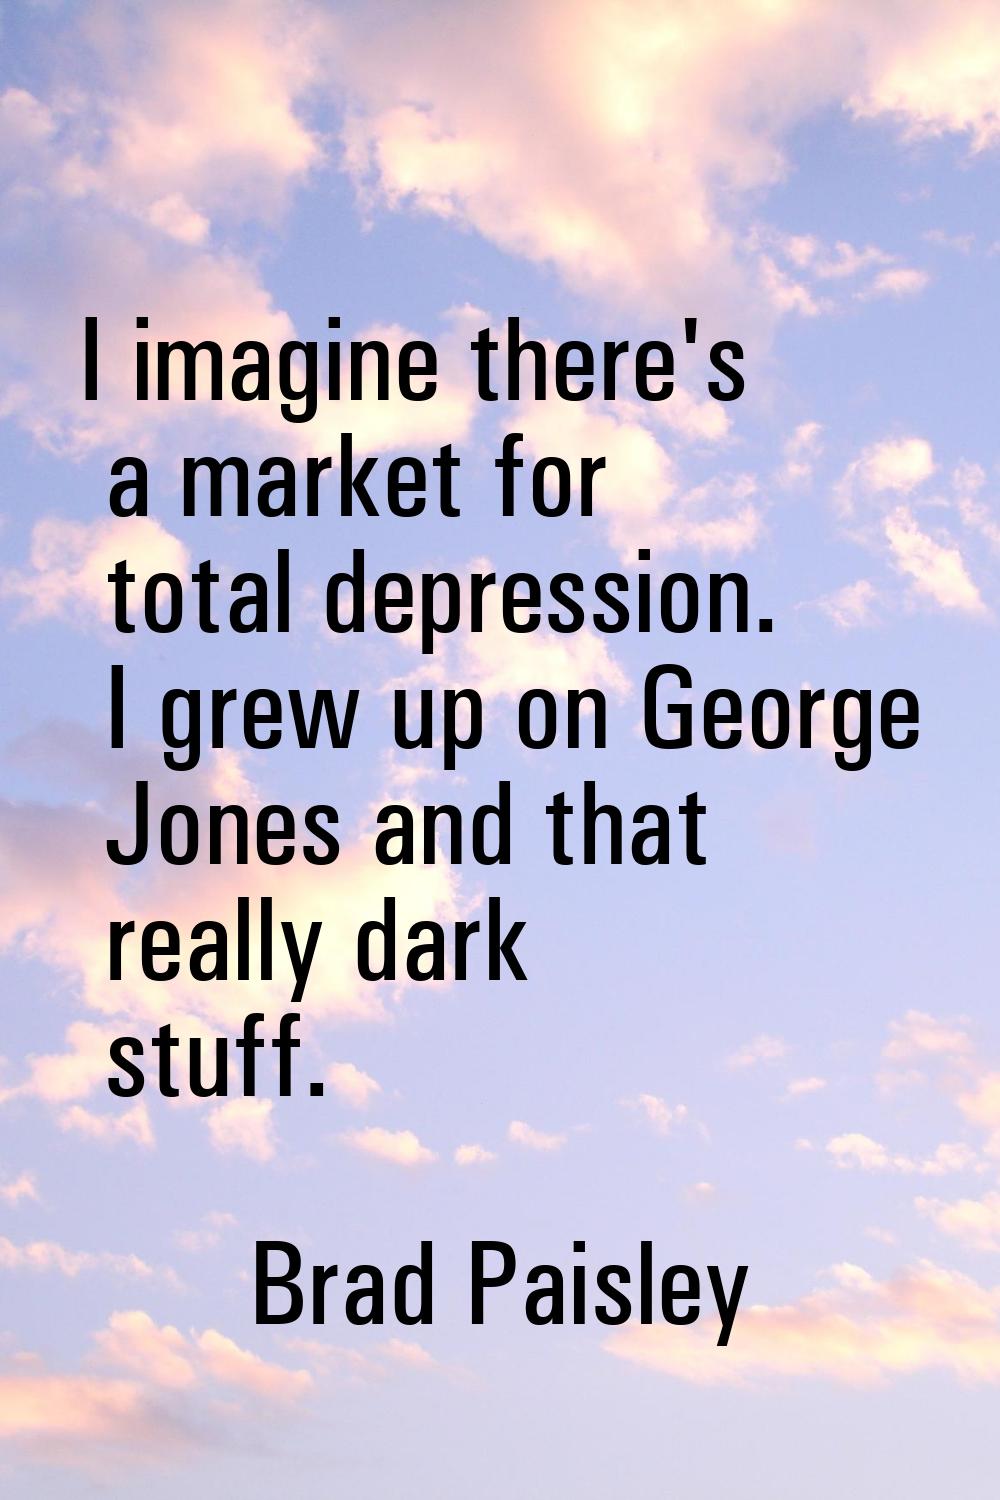 I imagine there's a market for total depression. I grew up on George Jones and that really dark stu